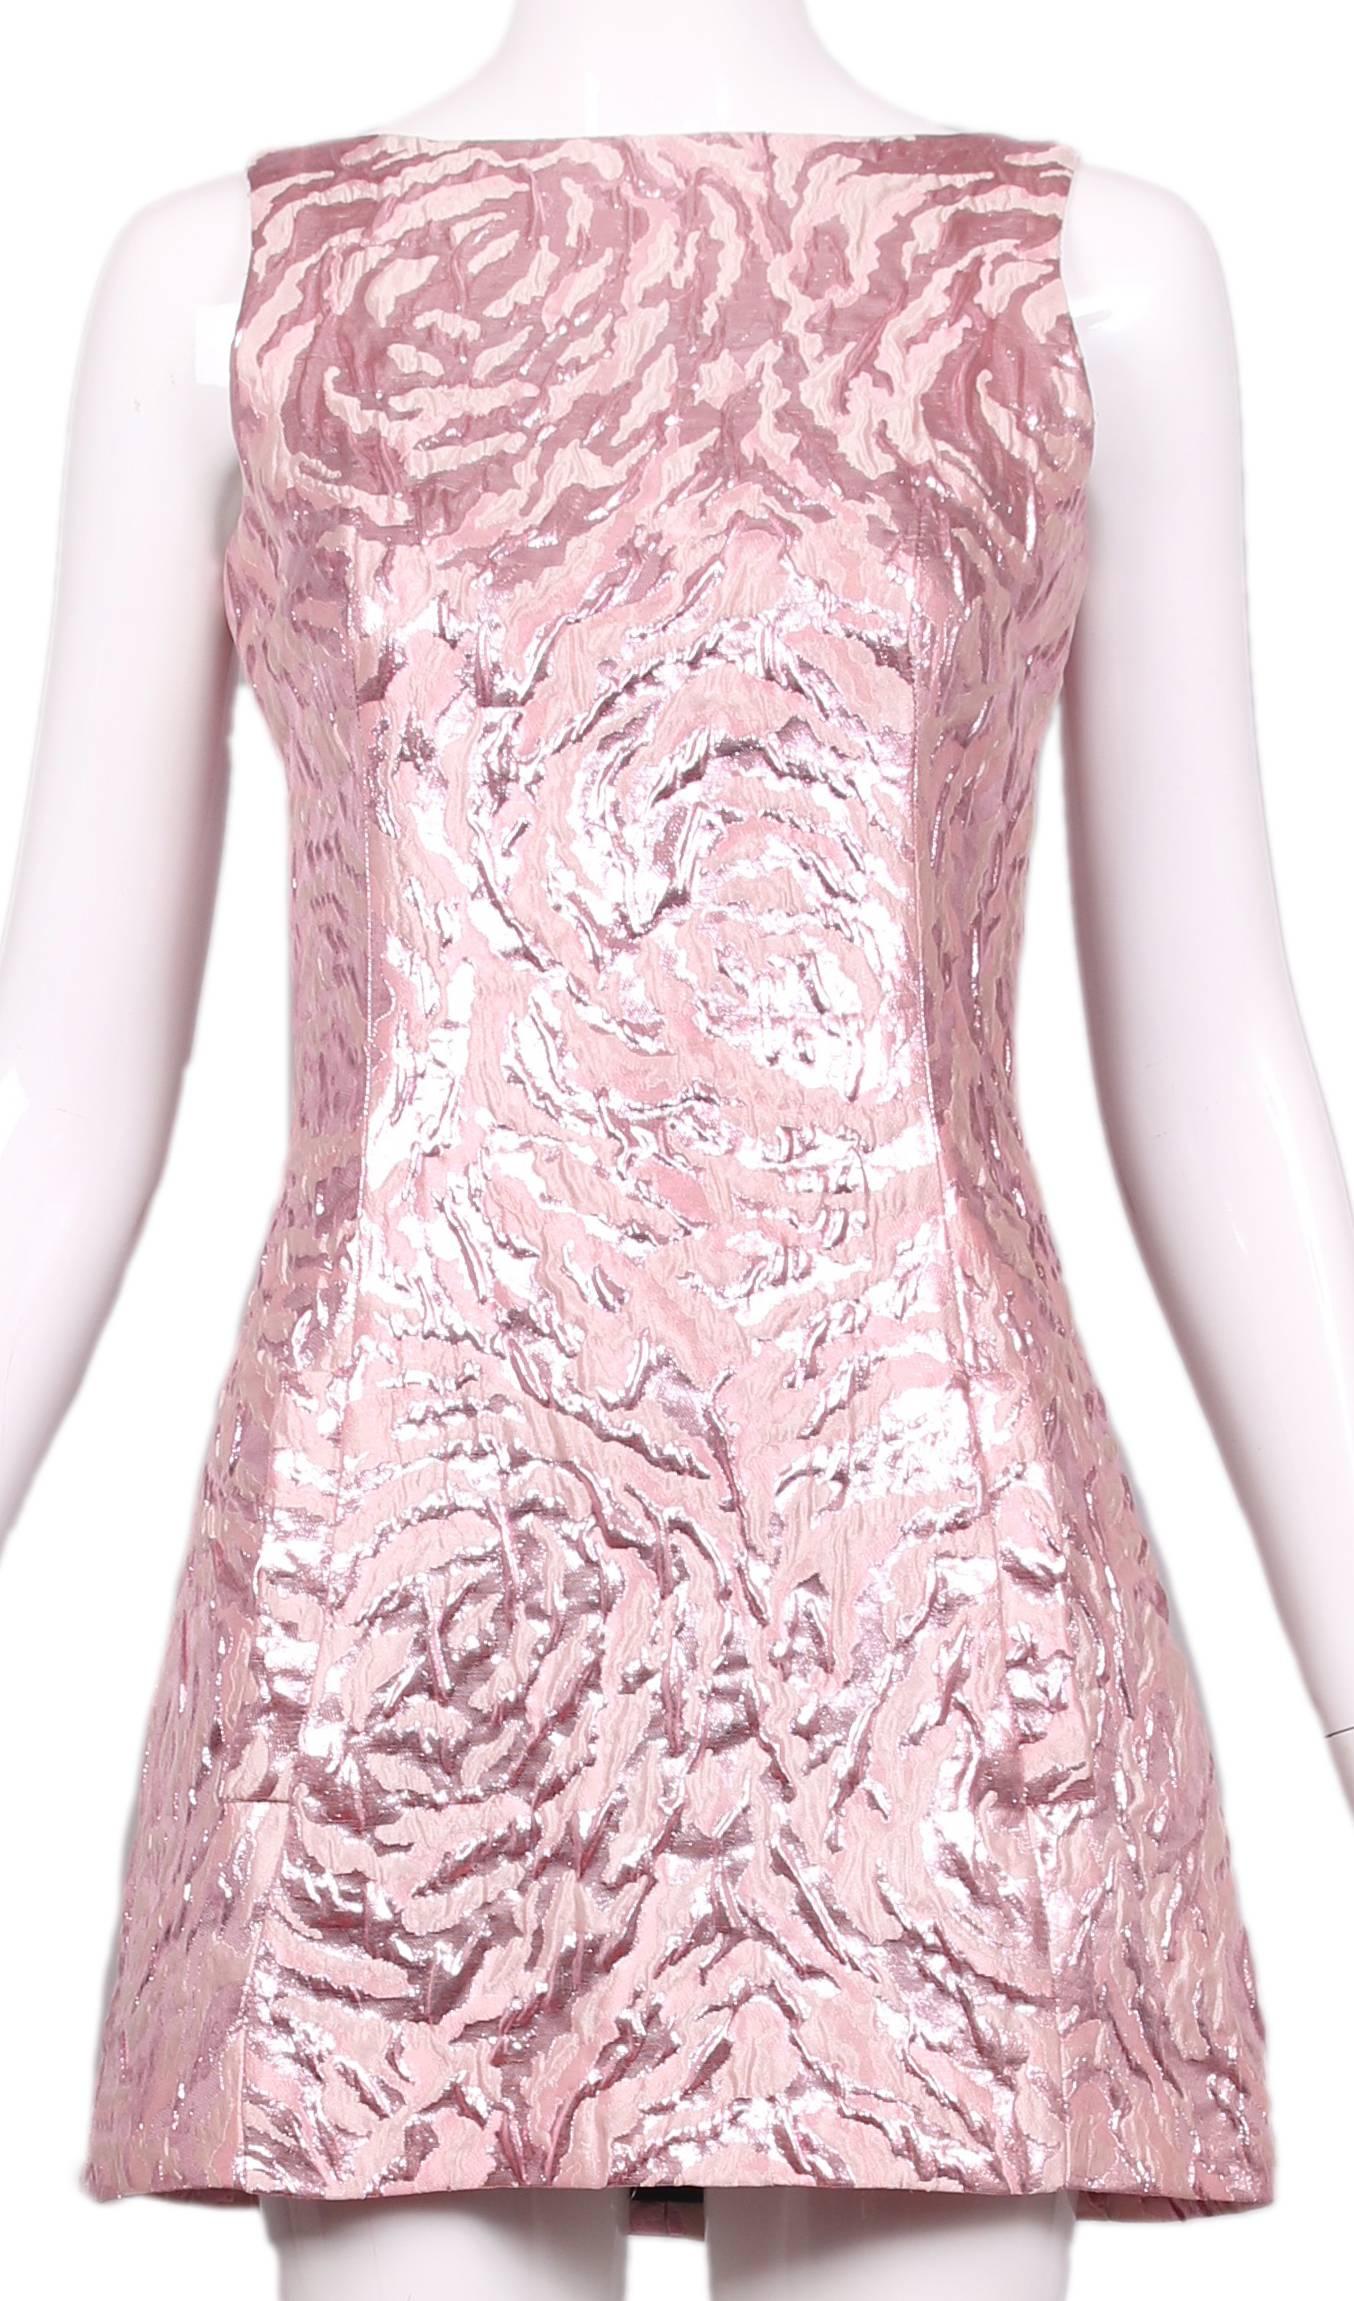 A Balenciaga sleeveless, crew-necked metallic pink abstract print mini dress. Features two frontal pockets, lined at the interior and zippers up the back. In excellent condition. Size tag 36.
MEASUREMENTS (in inches):
Bust - 32
Waist - 27
Hips -